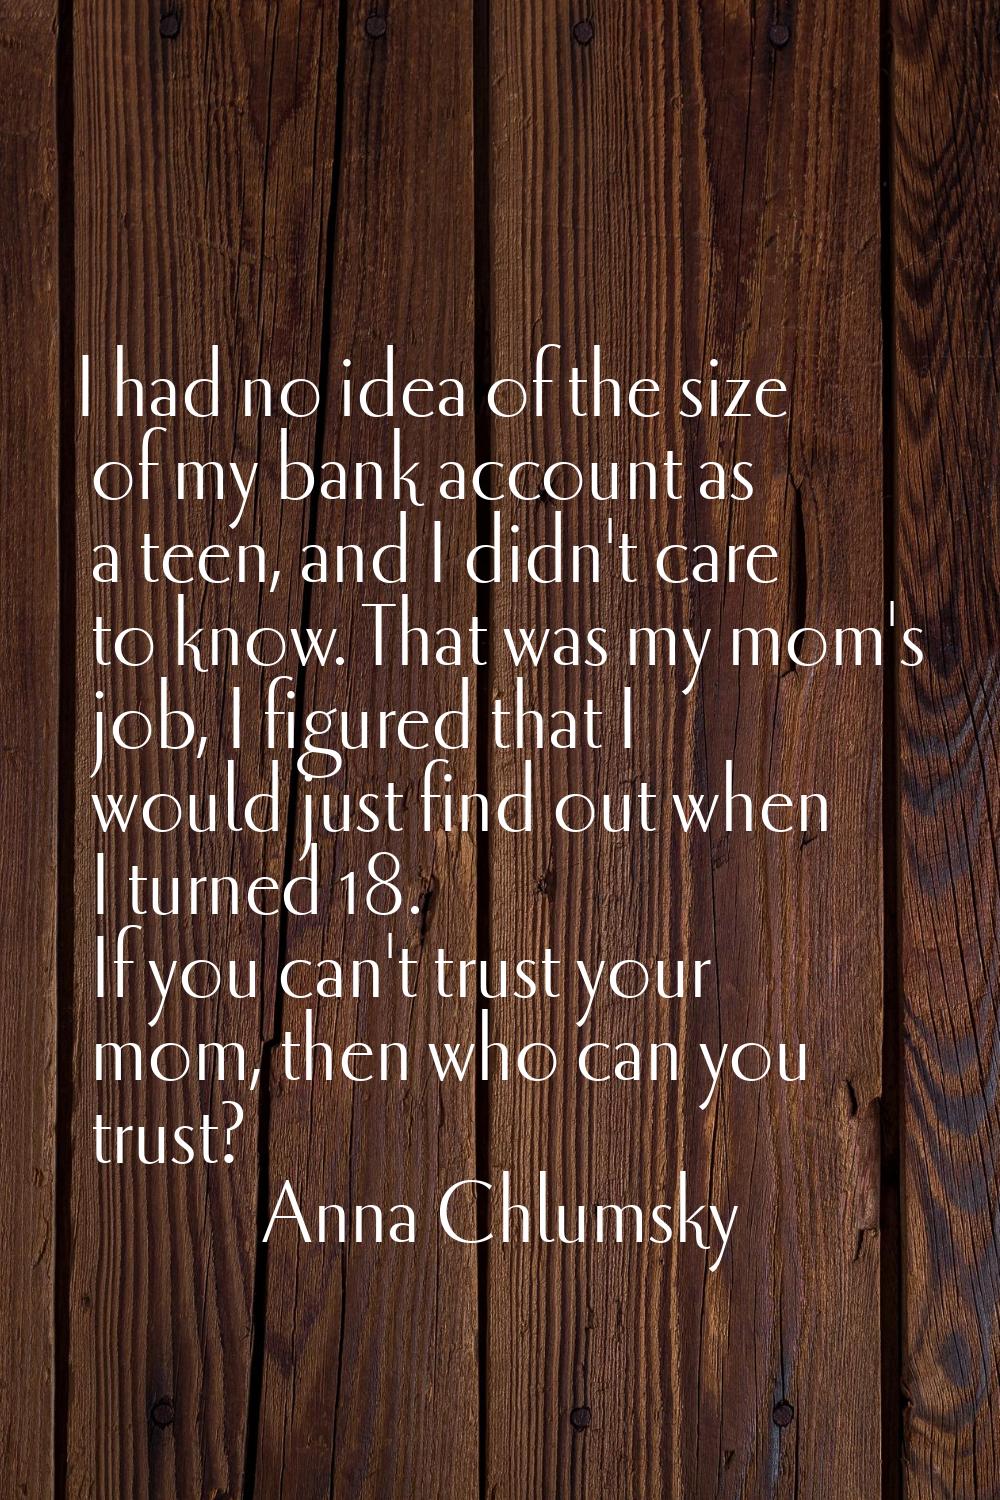 I had no idea of the size of my bank account as a teen, and I didn't care to know. That was my mom'